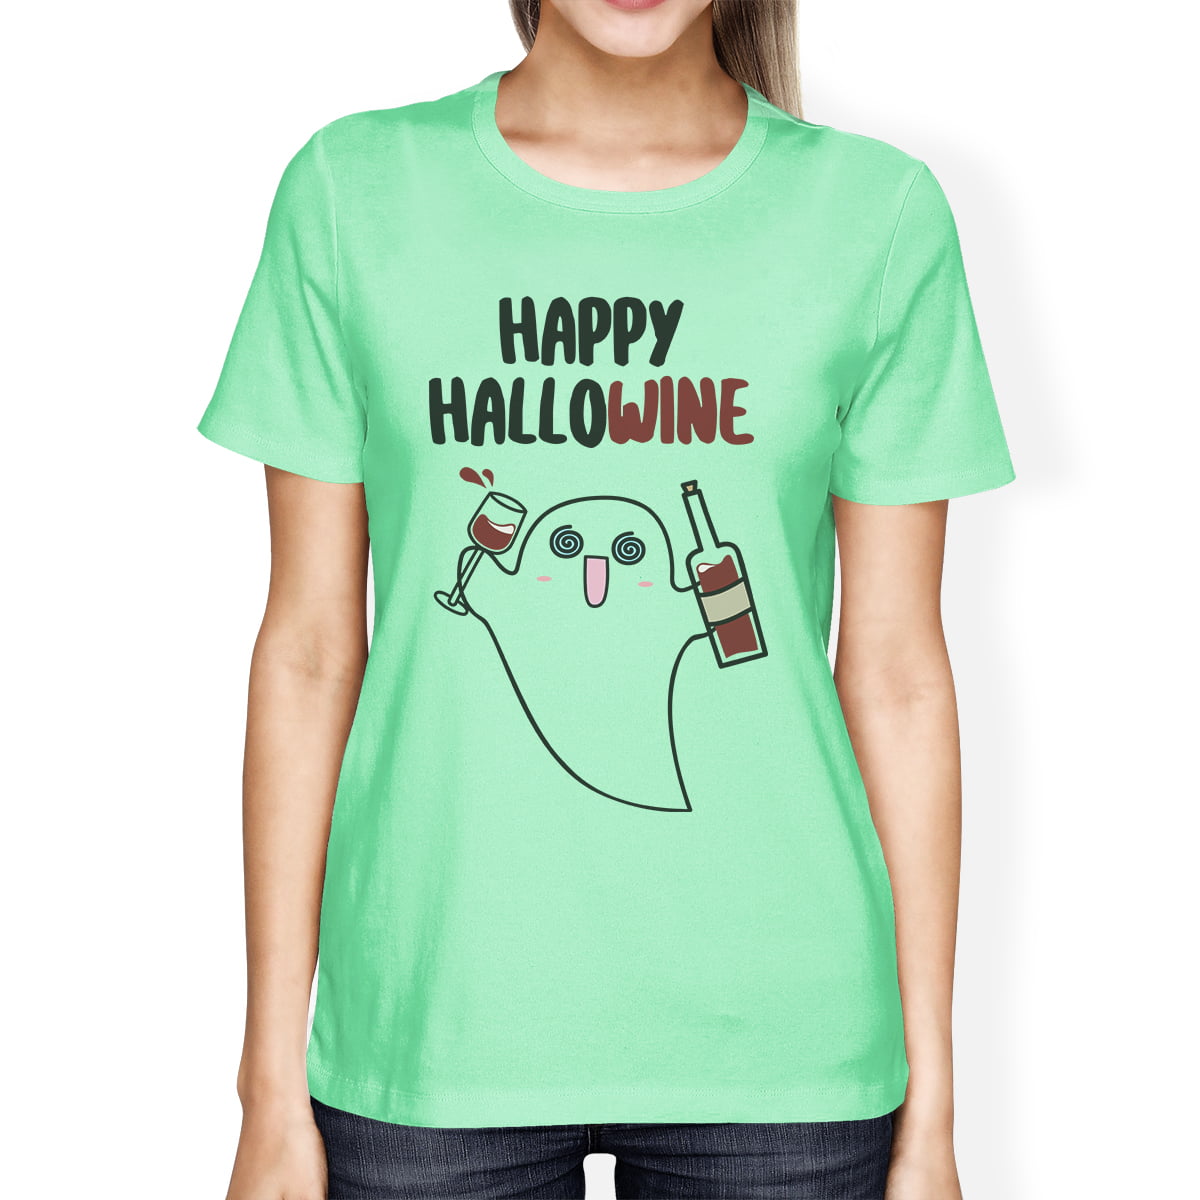 Unisex Jersey Short Sleeve Tee Spooky T-shirt Cute Ghost Shirt This is My Human Costume Tee Funny Halloween Shirt